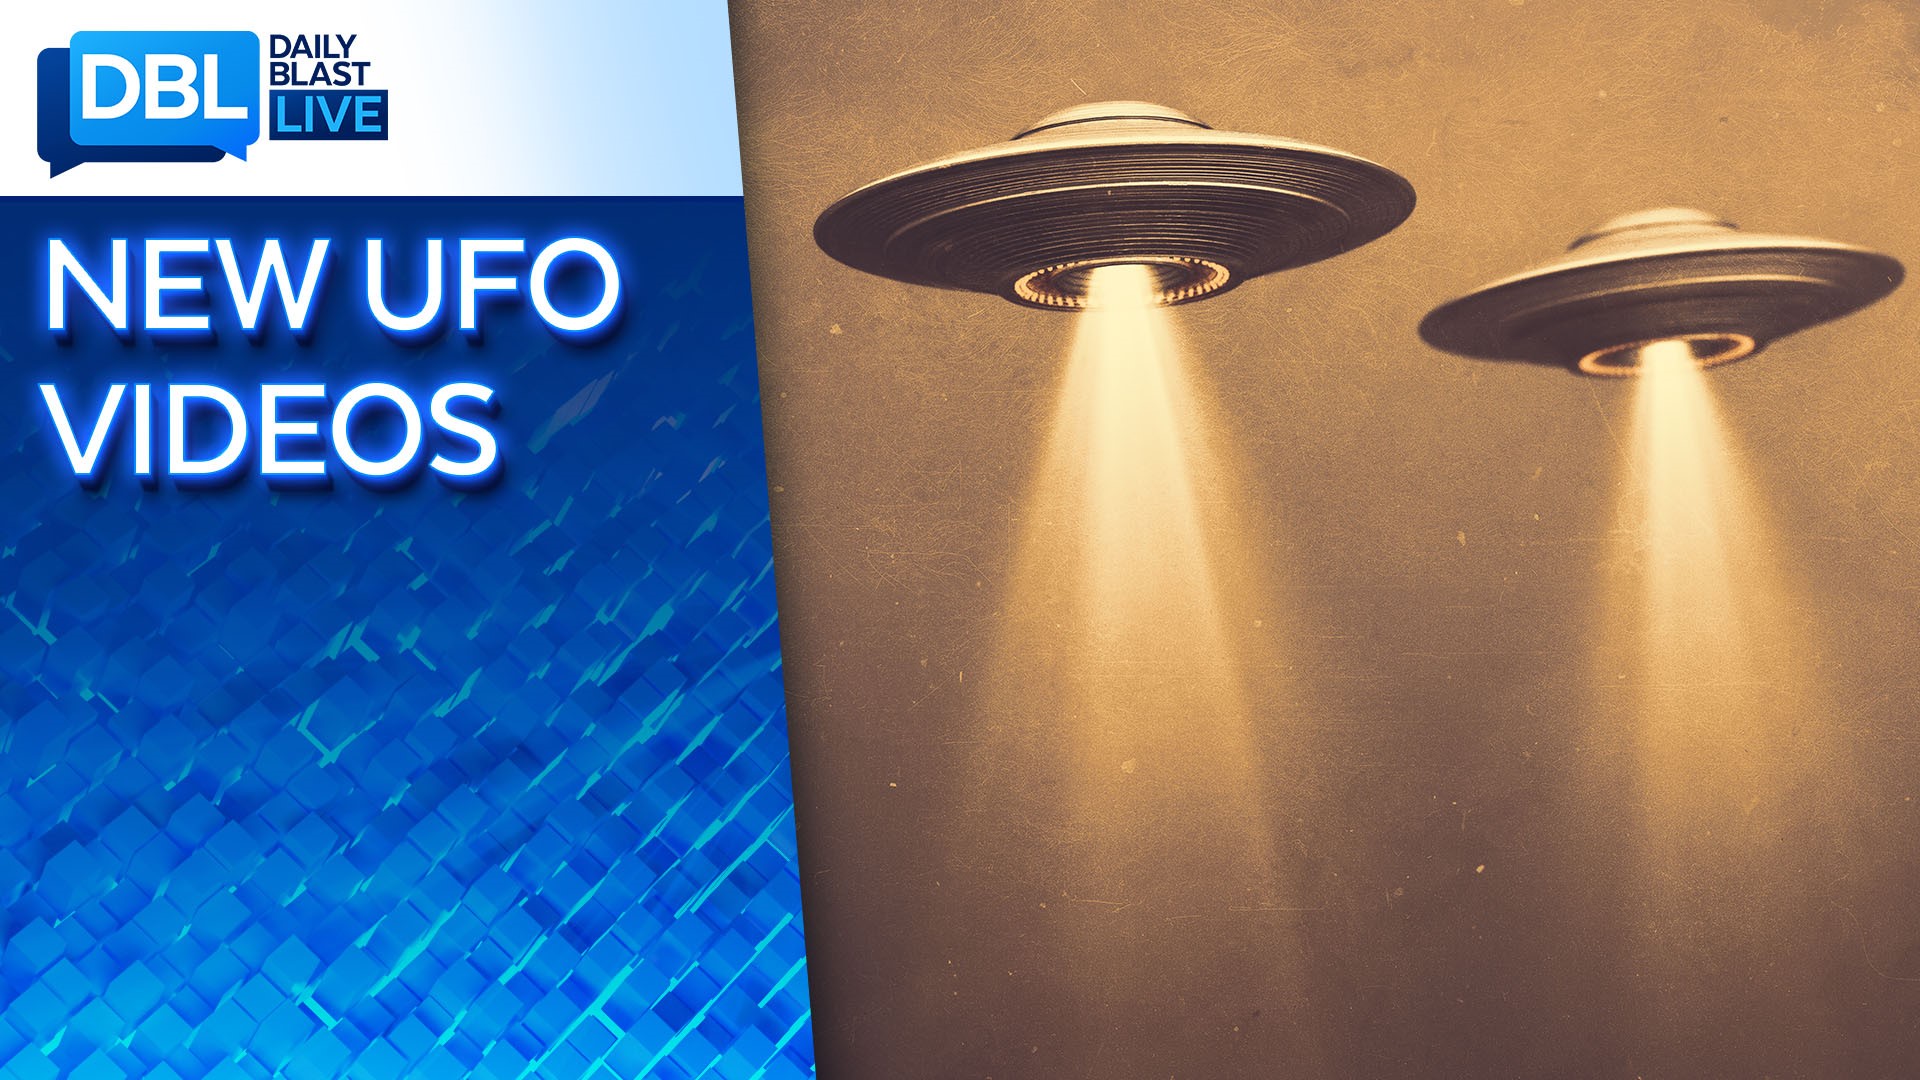 Officials on Tuesday confirmed hundreds of UFO sightings, adding that the objects do pose a threat to national security.